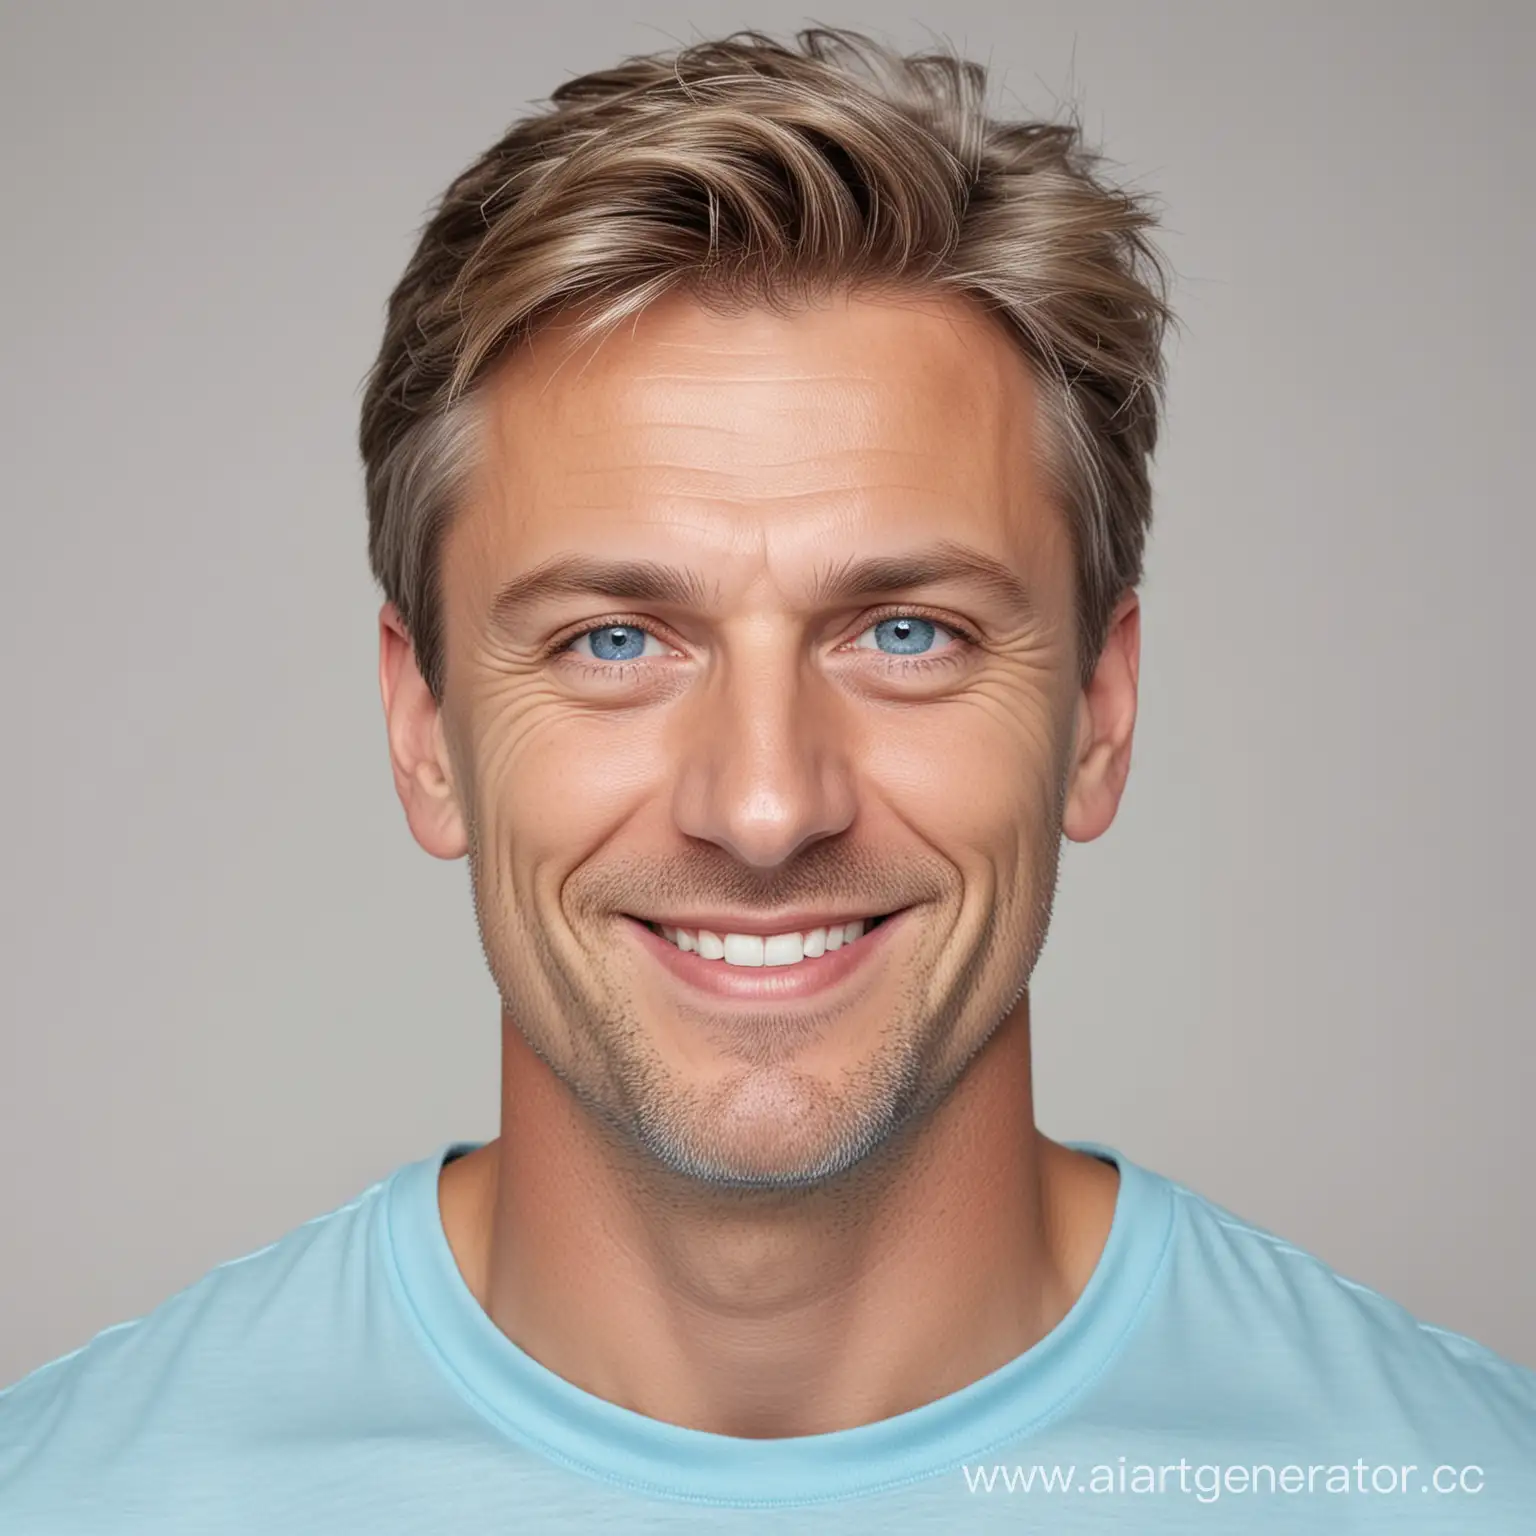 Smiling-European-Man-in-4K-Photo-Portrait-with-Light-Hair-and-Blue-Eyes